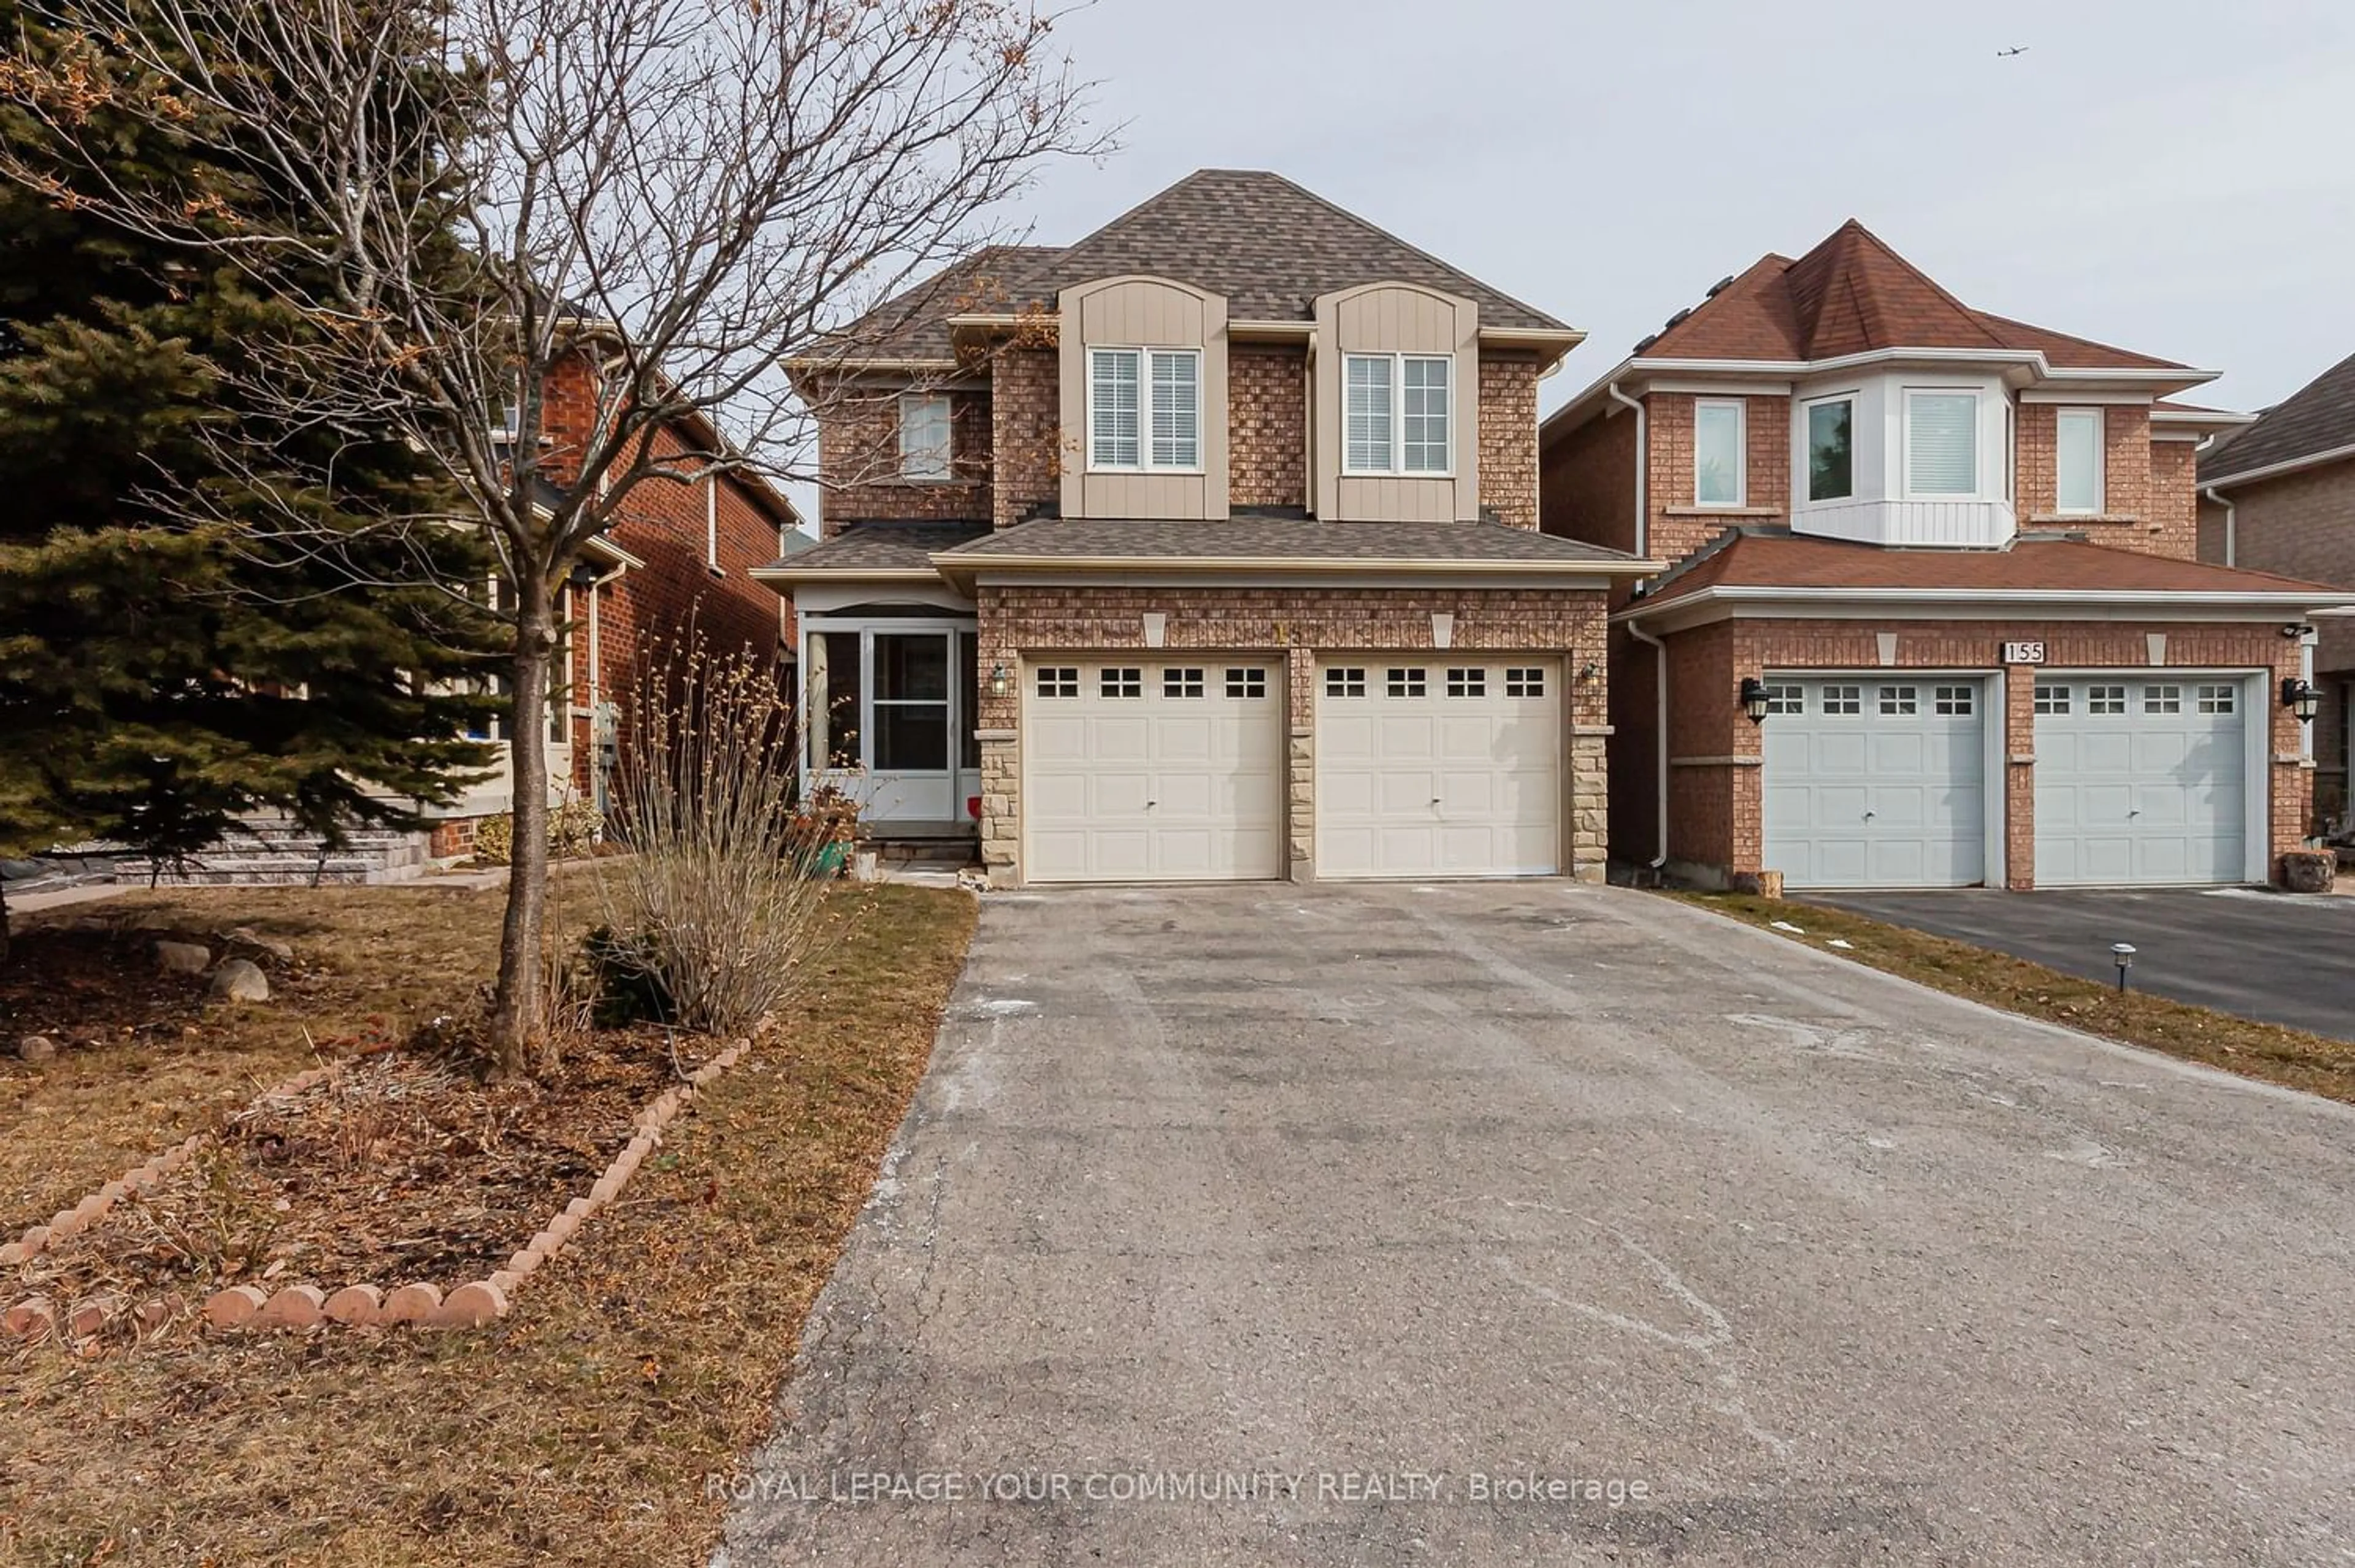 Home with brick exterior material for 157 Manorheights St, Richmond Hill Ontario L4S 2S8